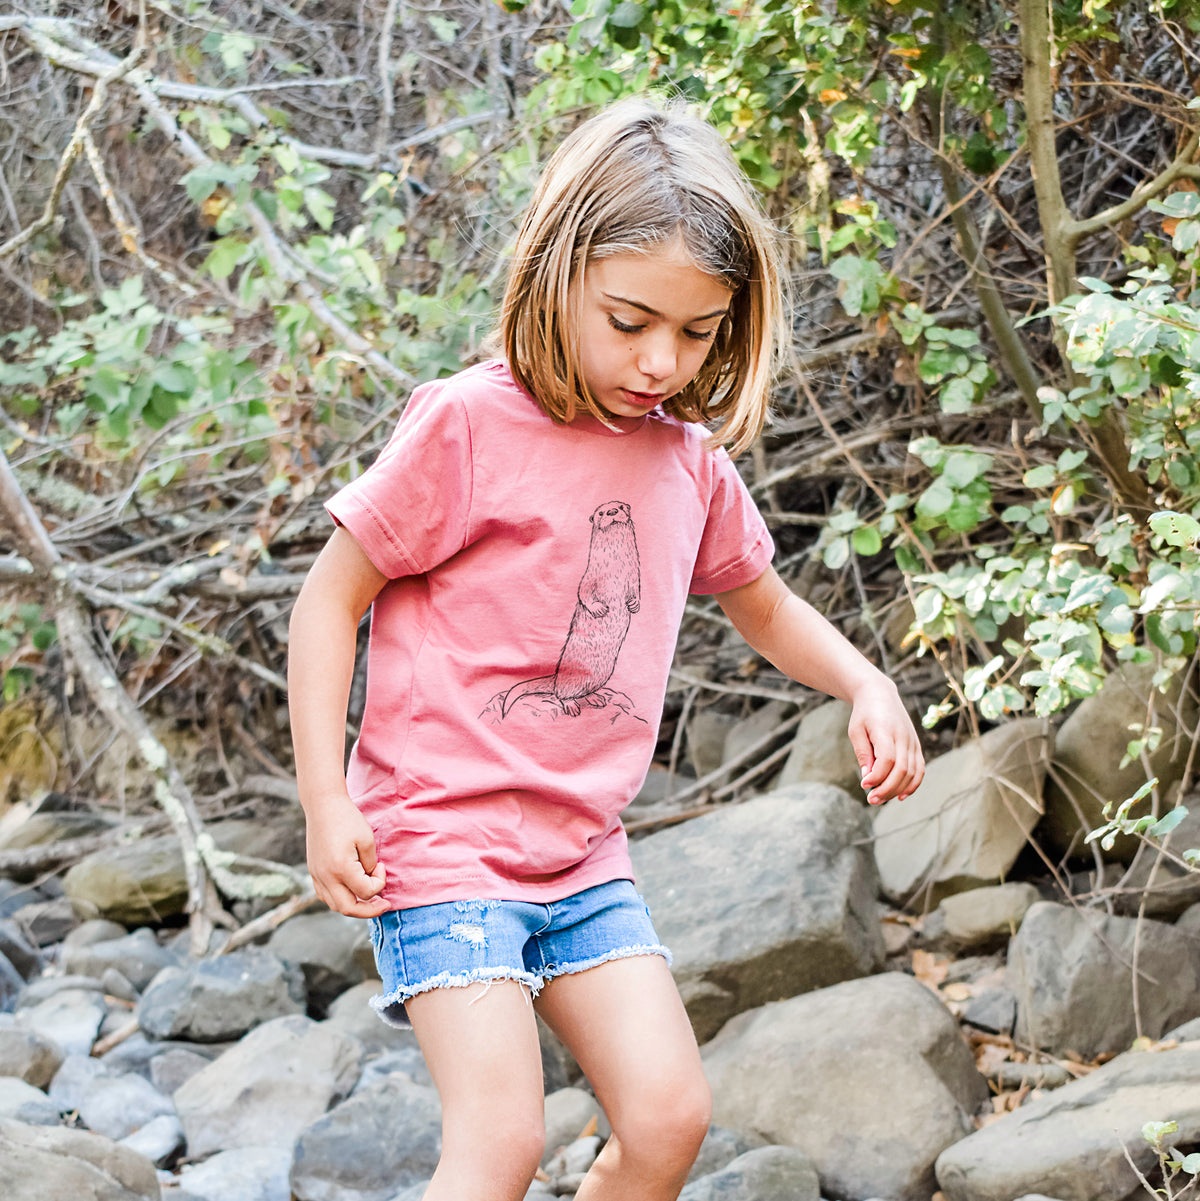 North American River Otter - Lontra canadensis - Kids Shirt